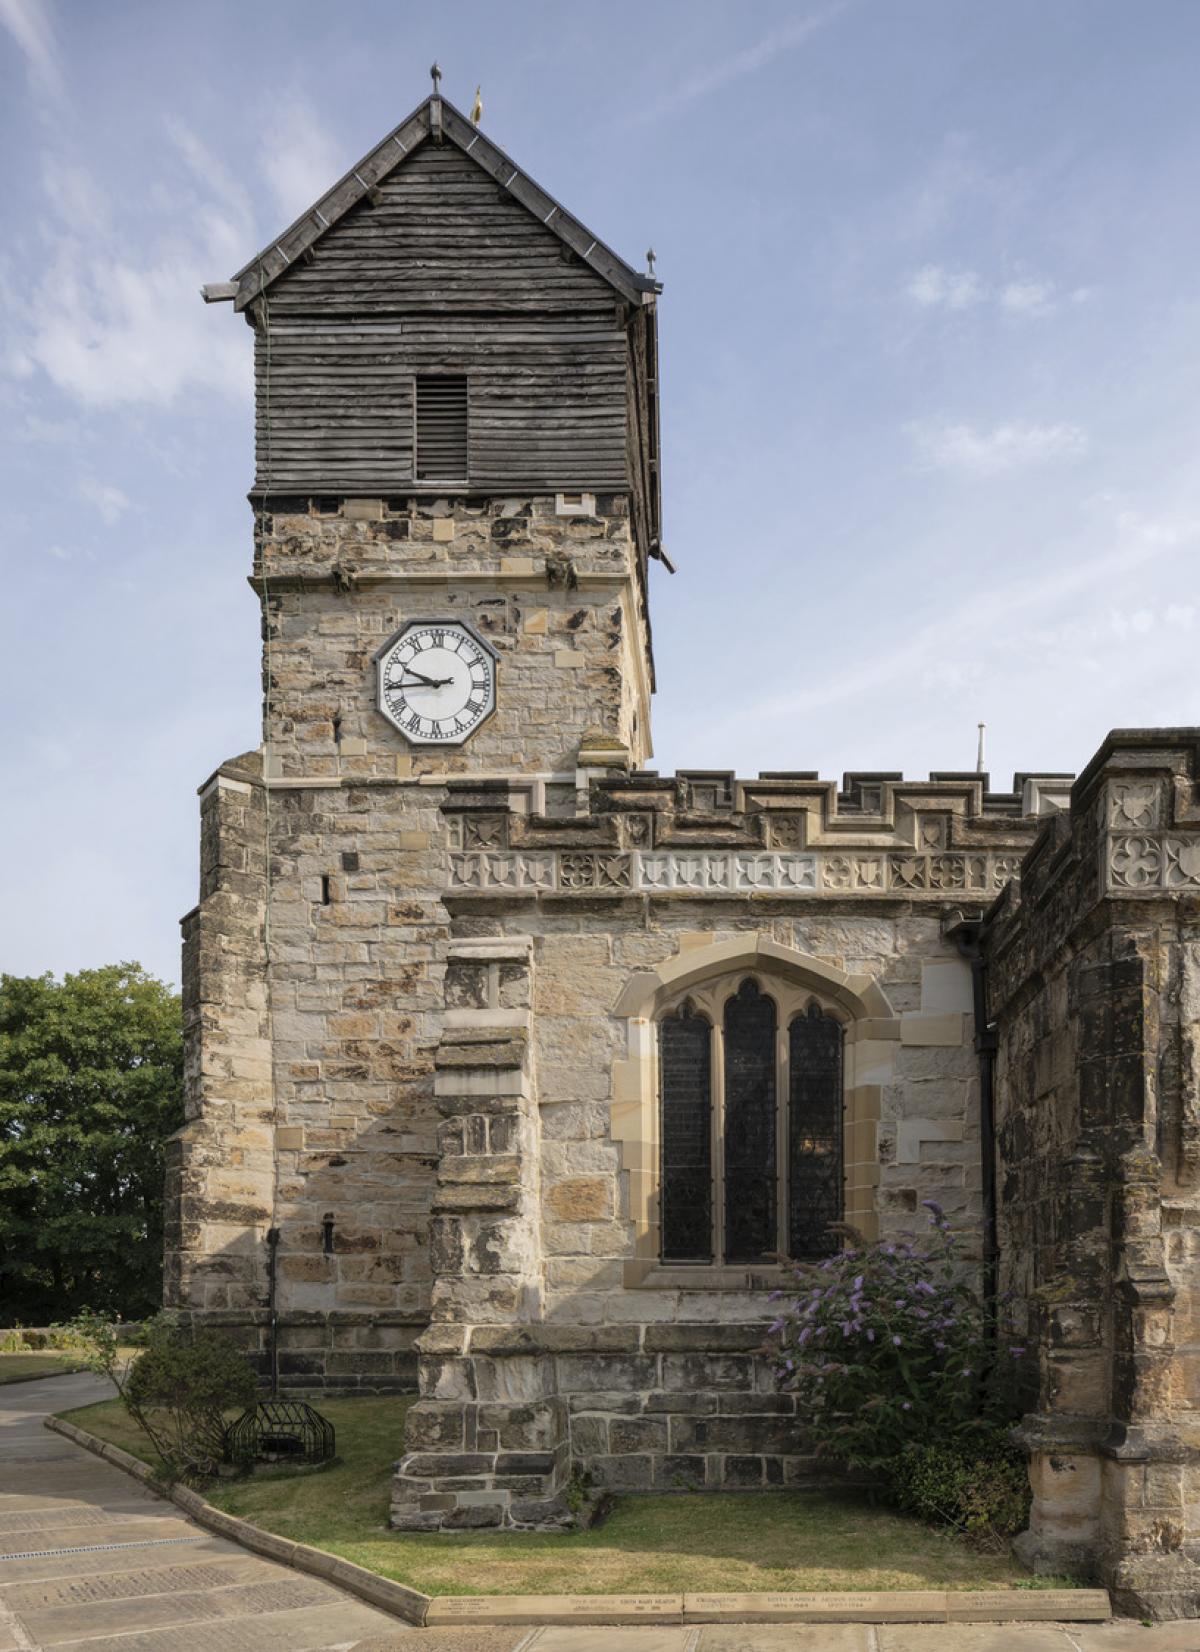 Exterior photo of a church tower